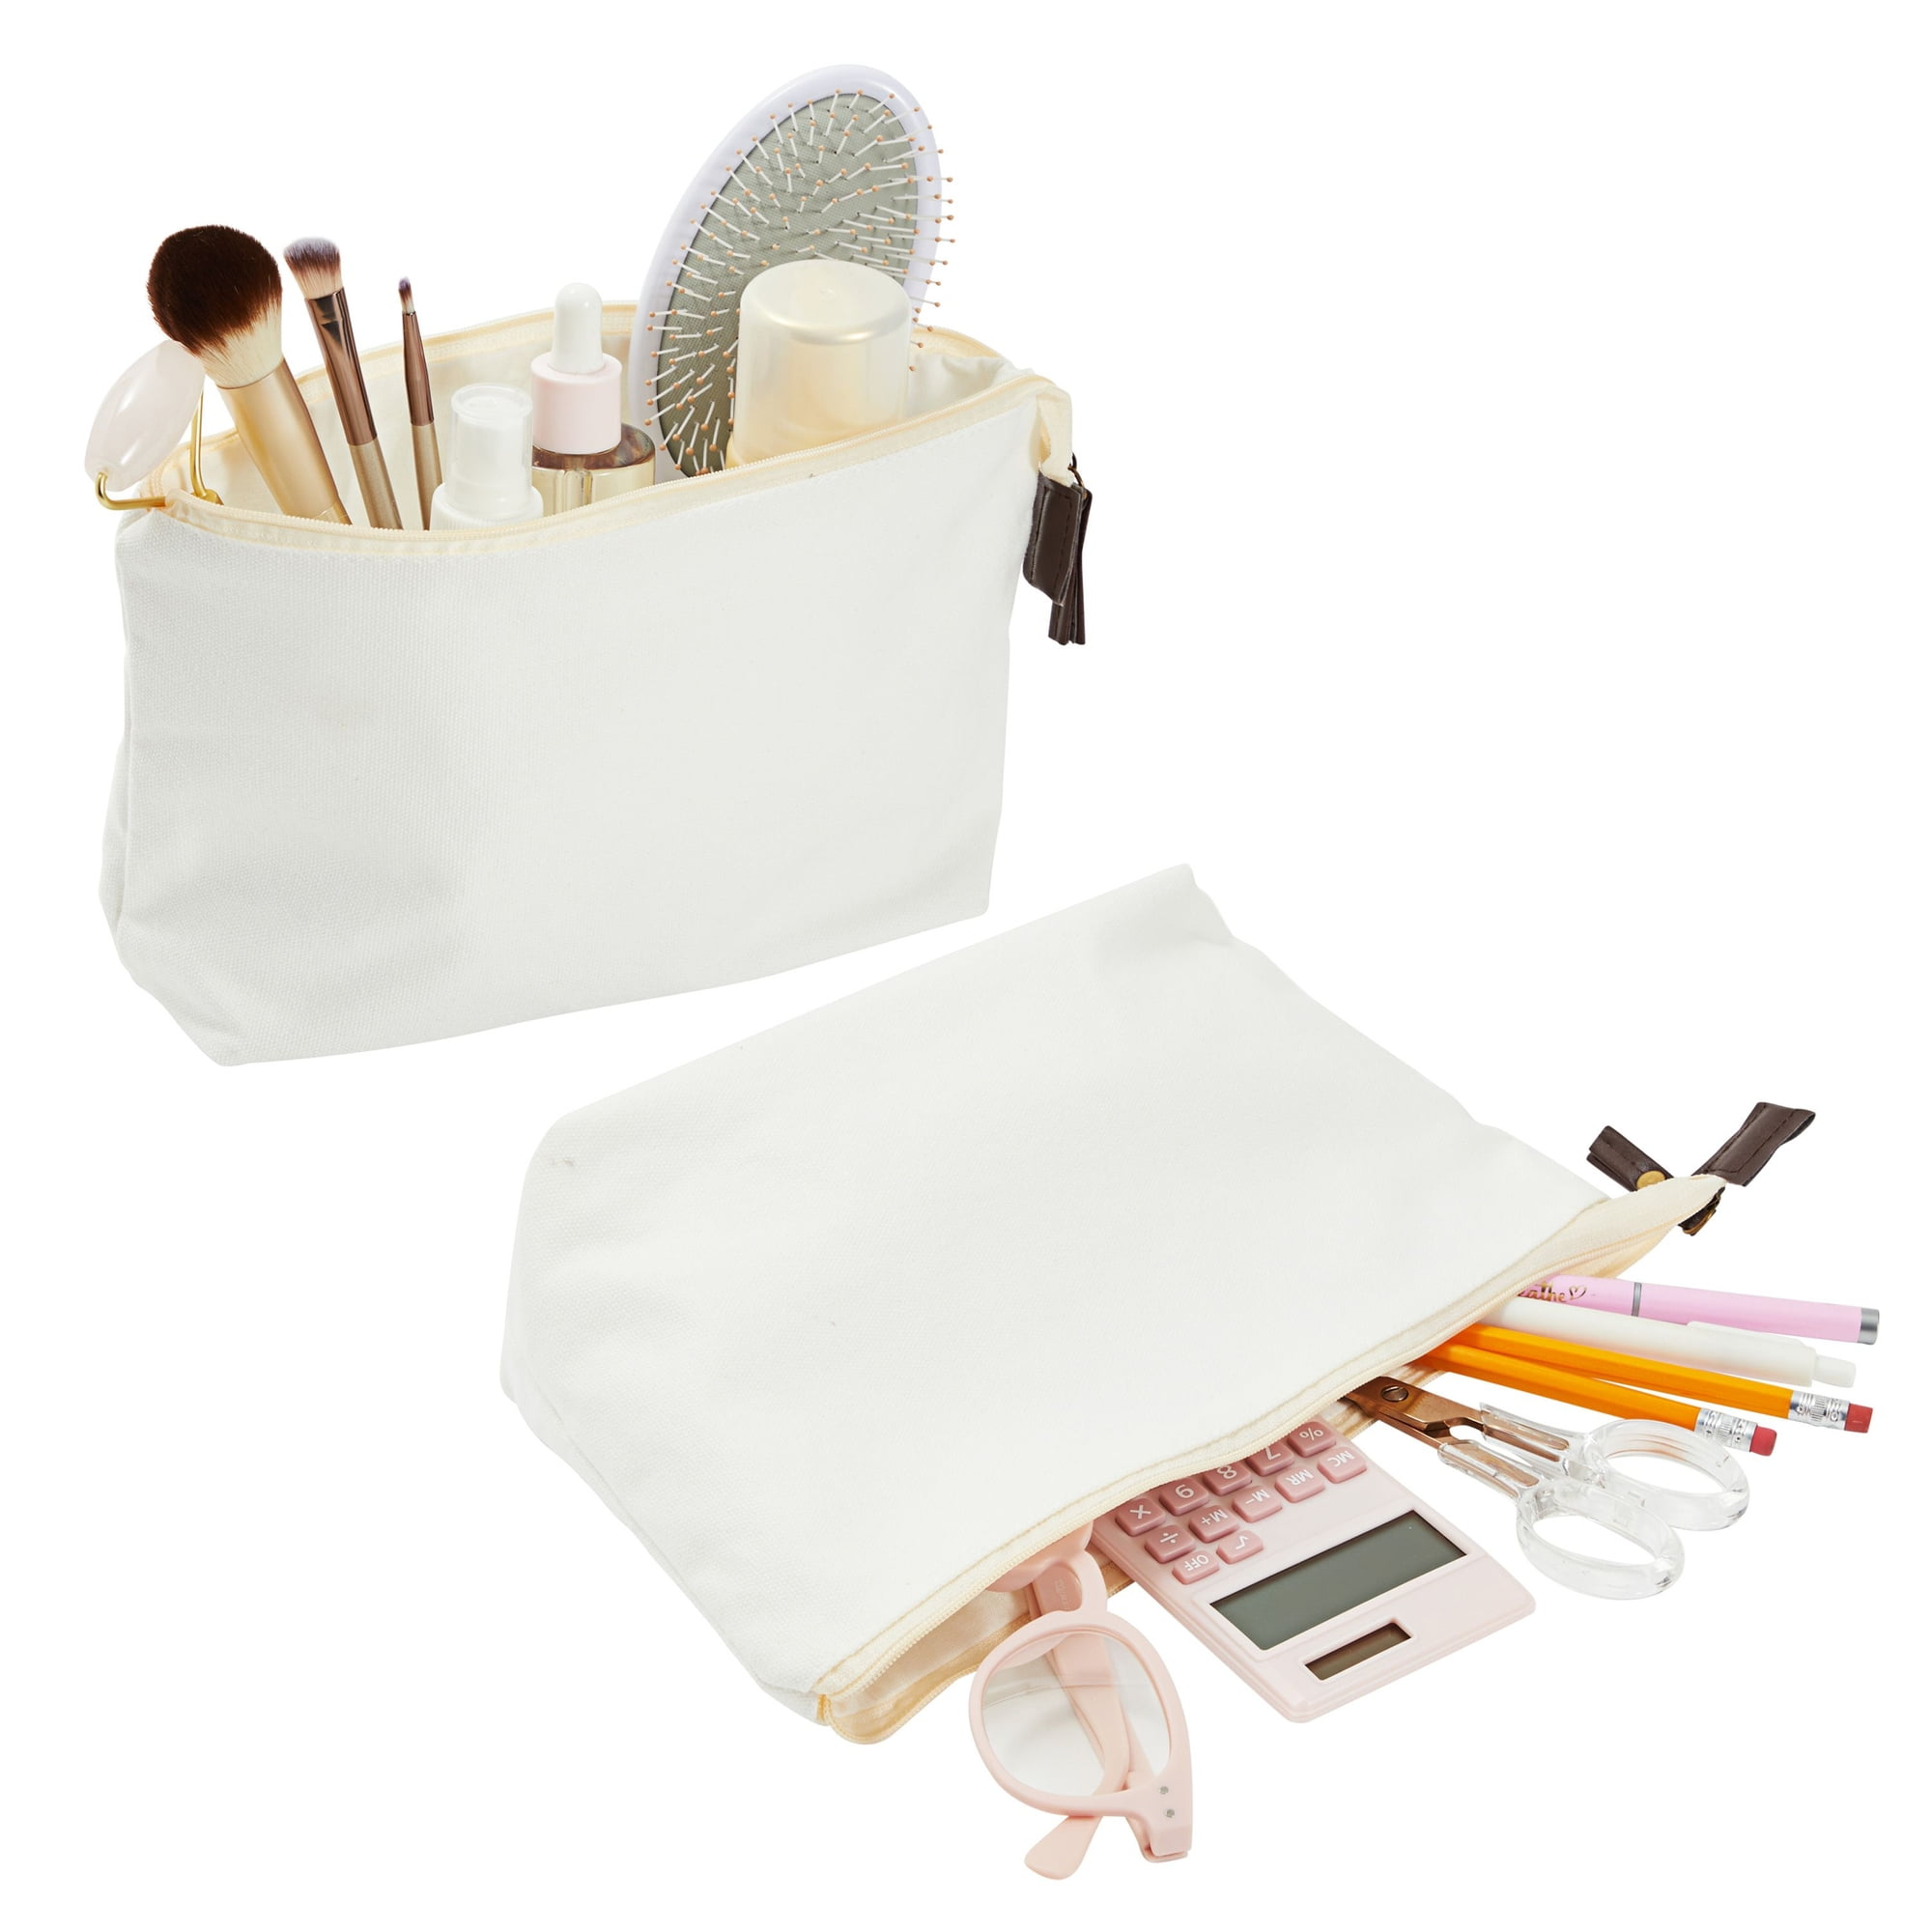 Bright Creations 6-Pack White Makeup Bag Set with Zipper, Customizable  Canvas Pouches for DIY Crafts, Cosmetic Items, Stationary, Party Favors,  8x6 in